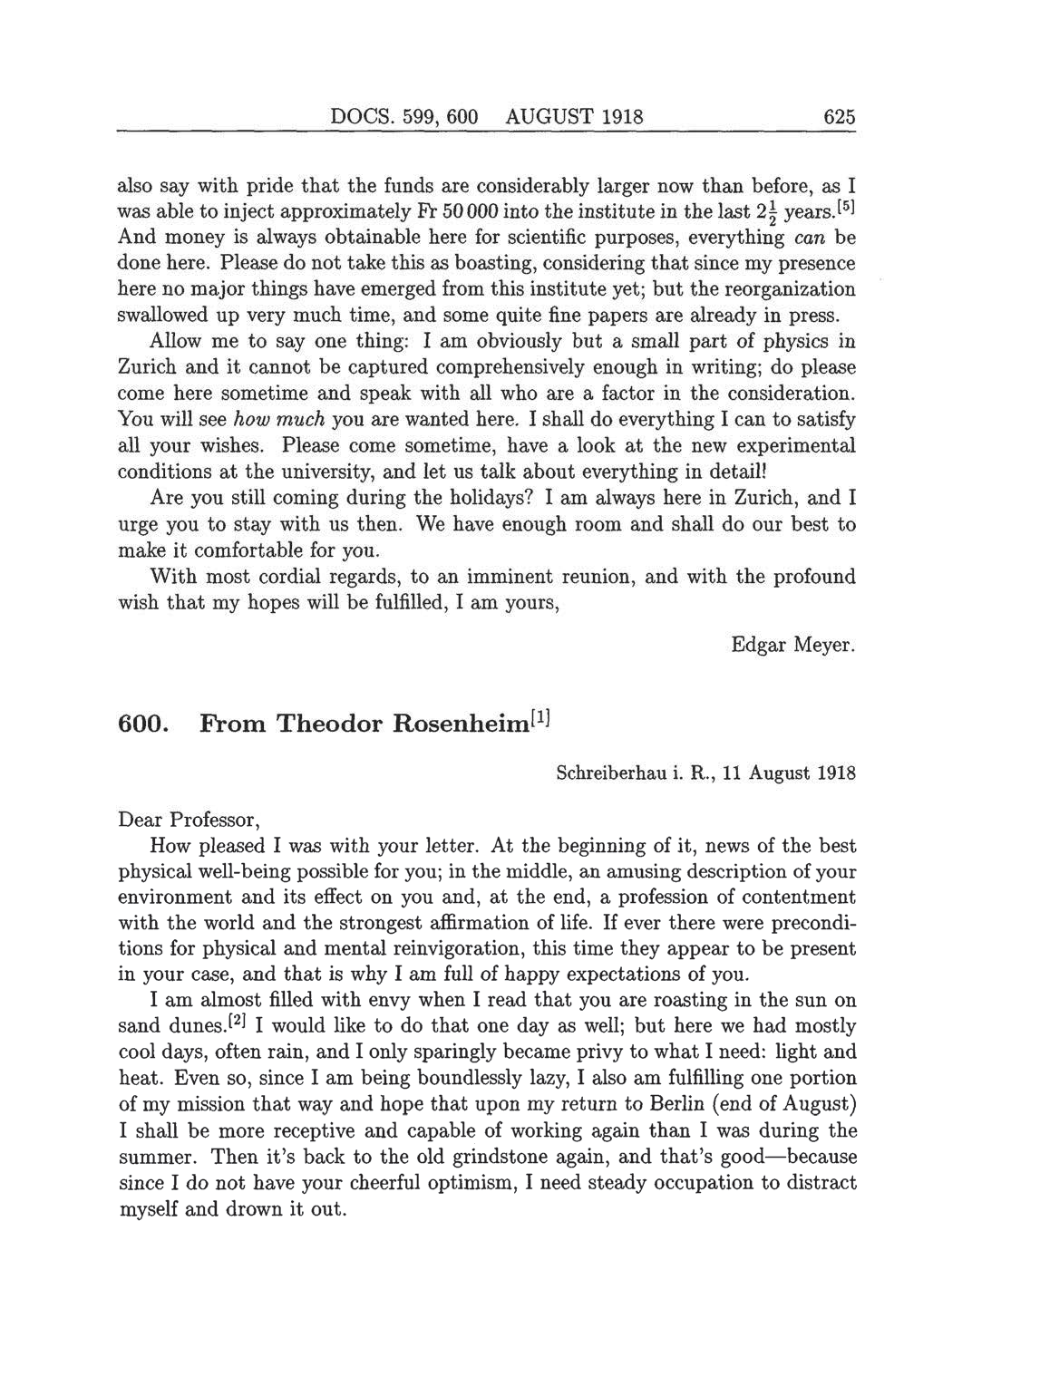 Volume 8: The Berlin Years: Correspondence, 1914-1918 (English translation supplement) page 625